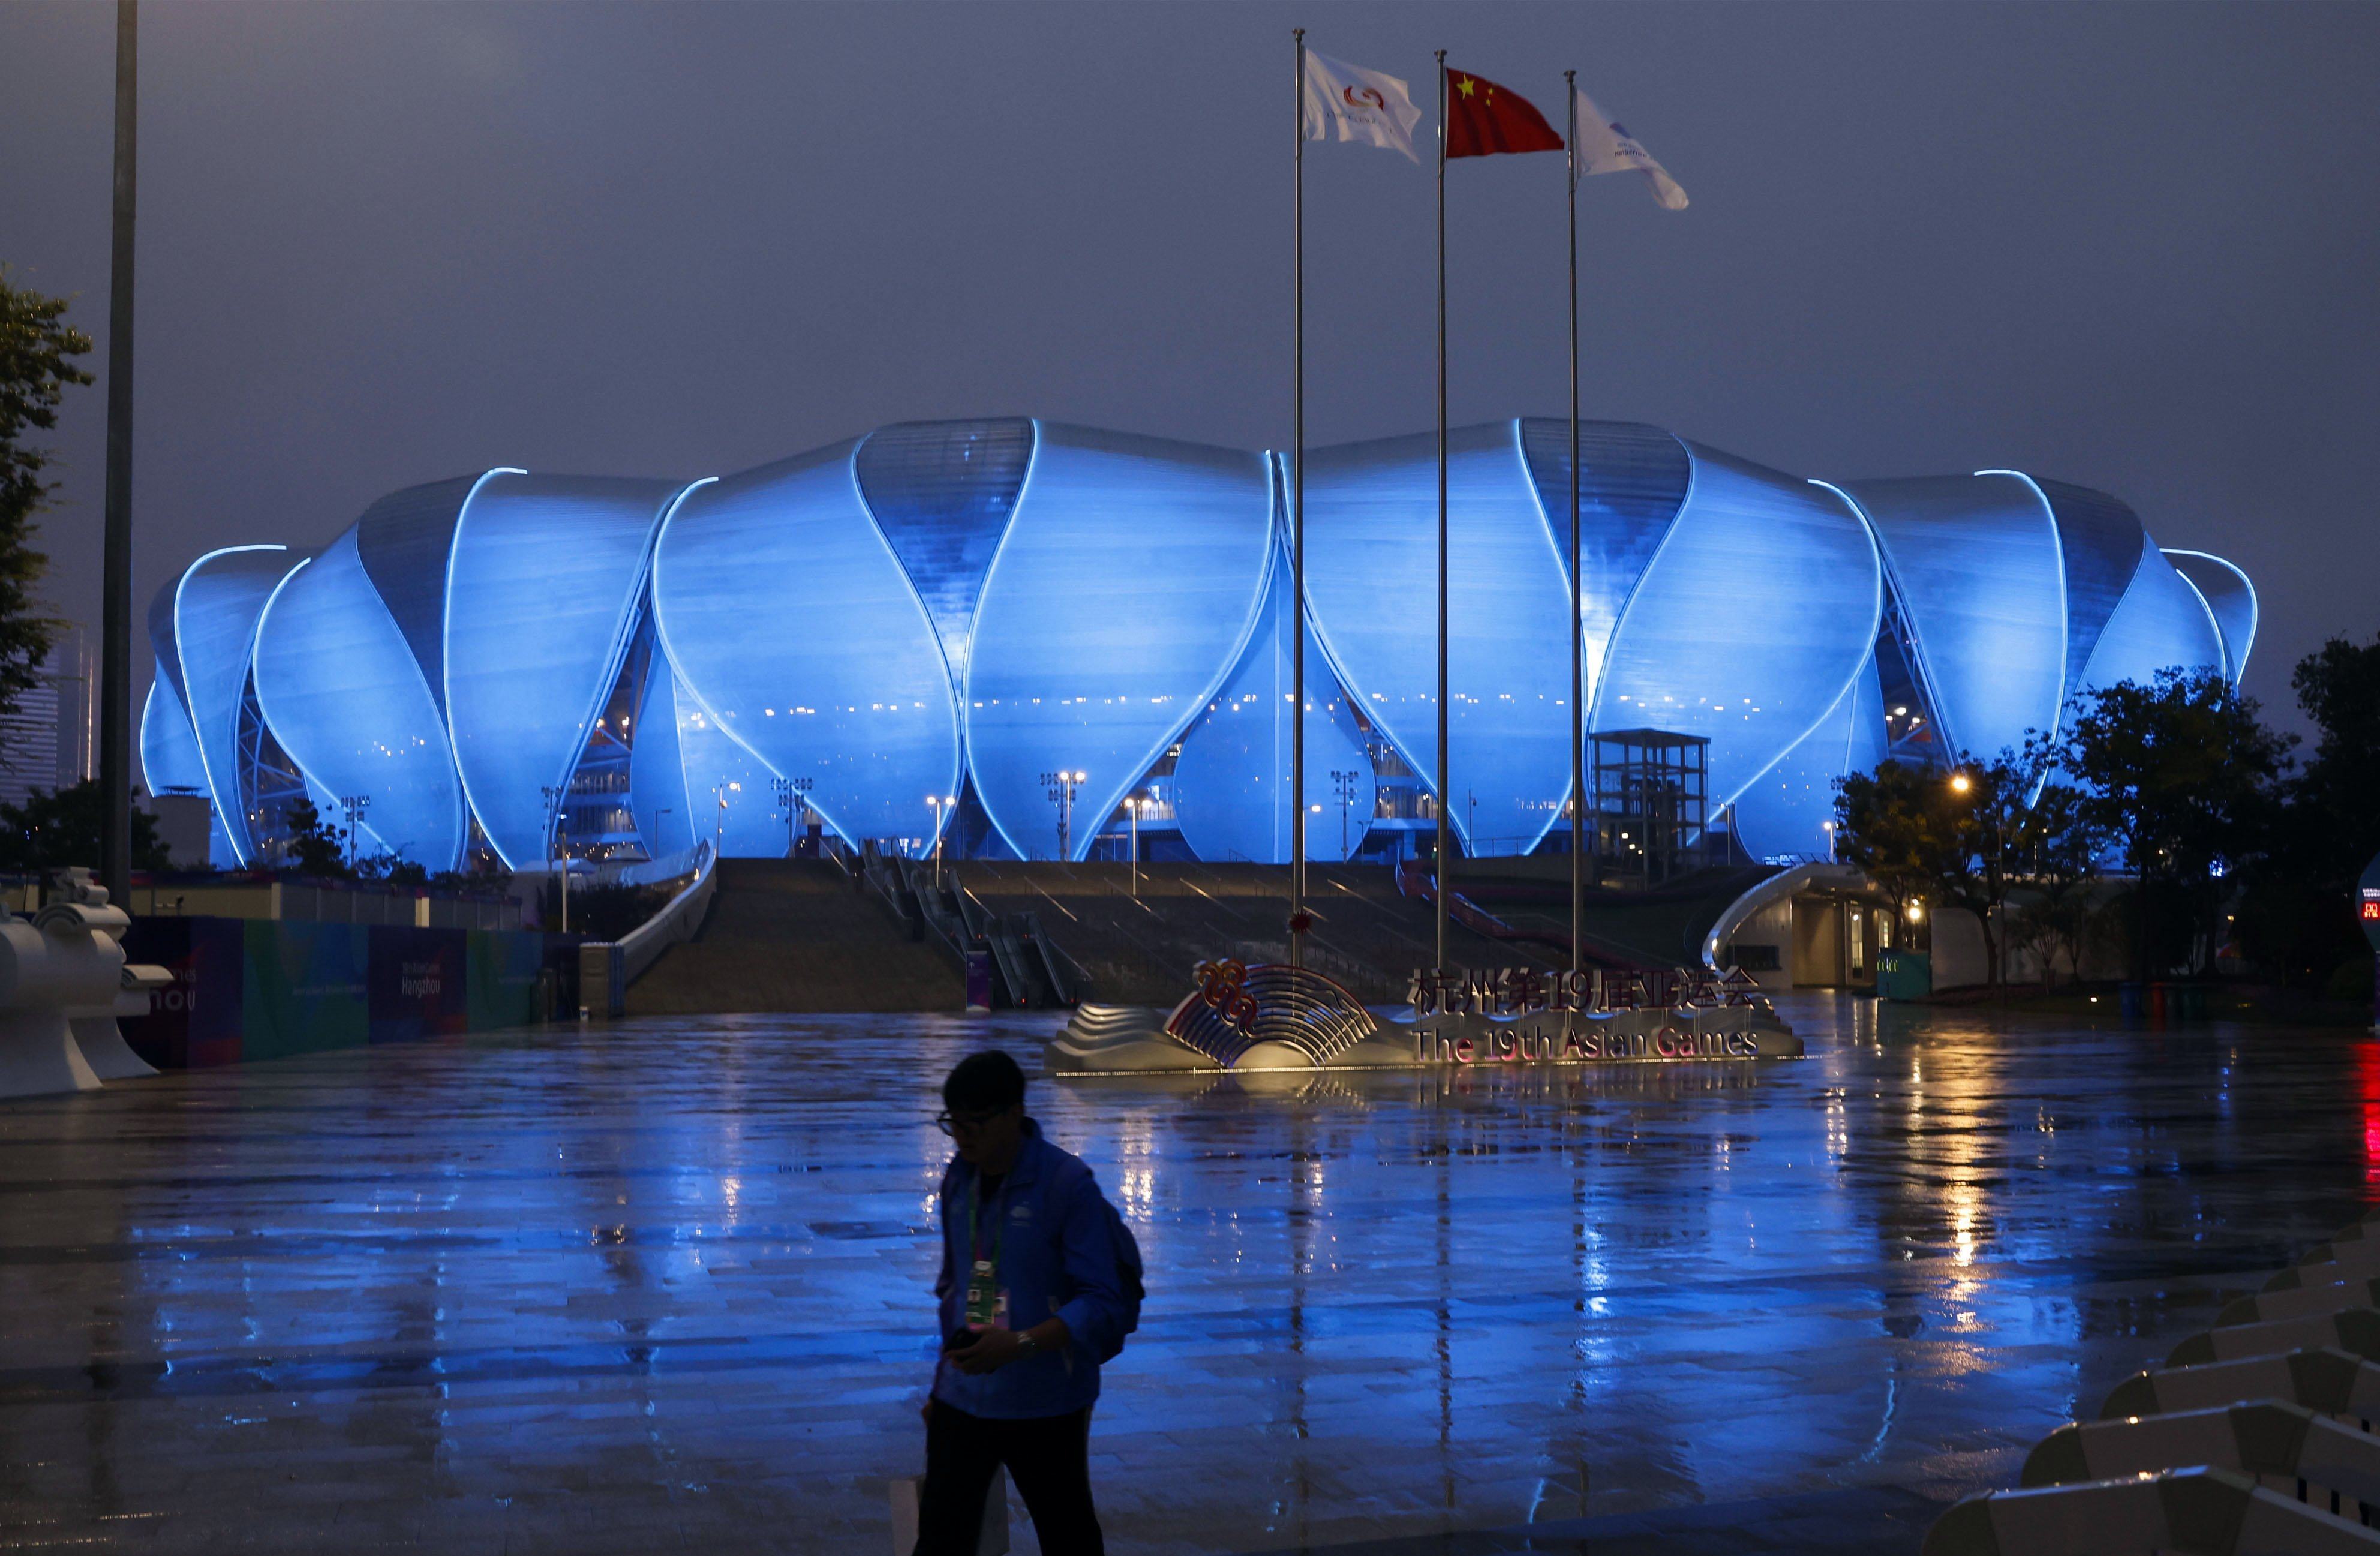 The Chinese city of Hangzhou is hosting the Asian Games until October 8. Photo: Kyodo